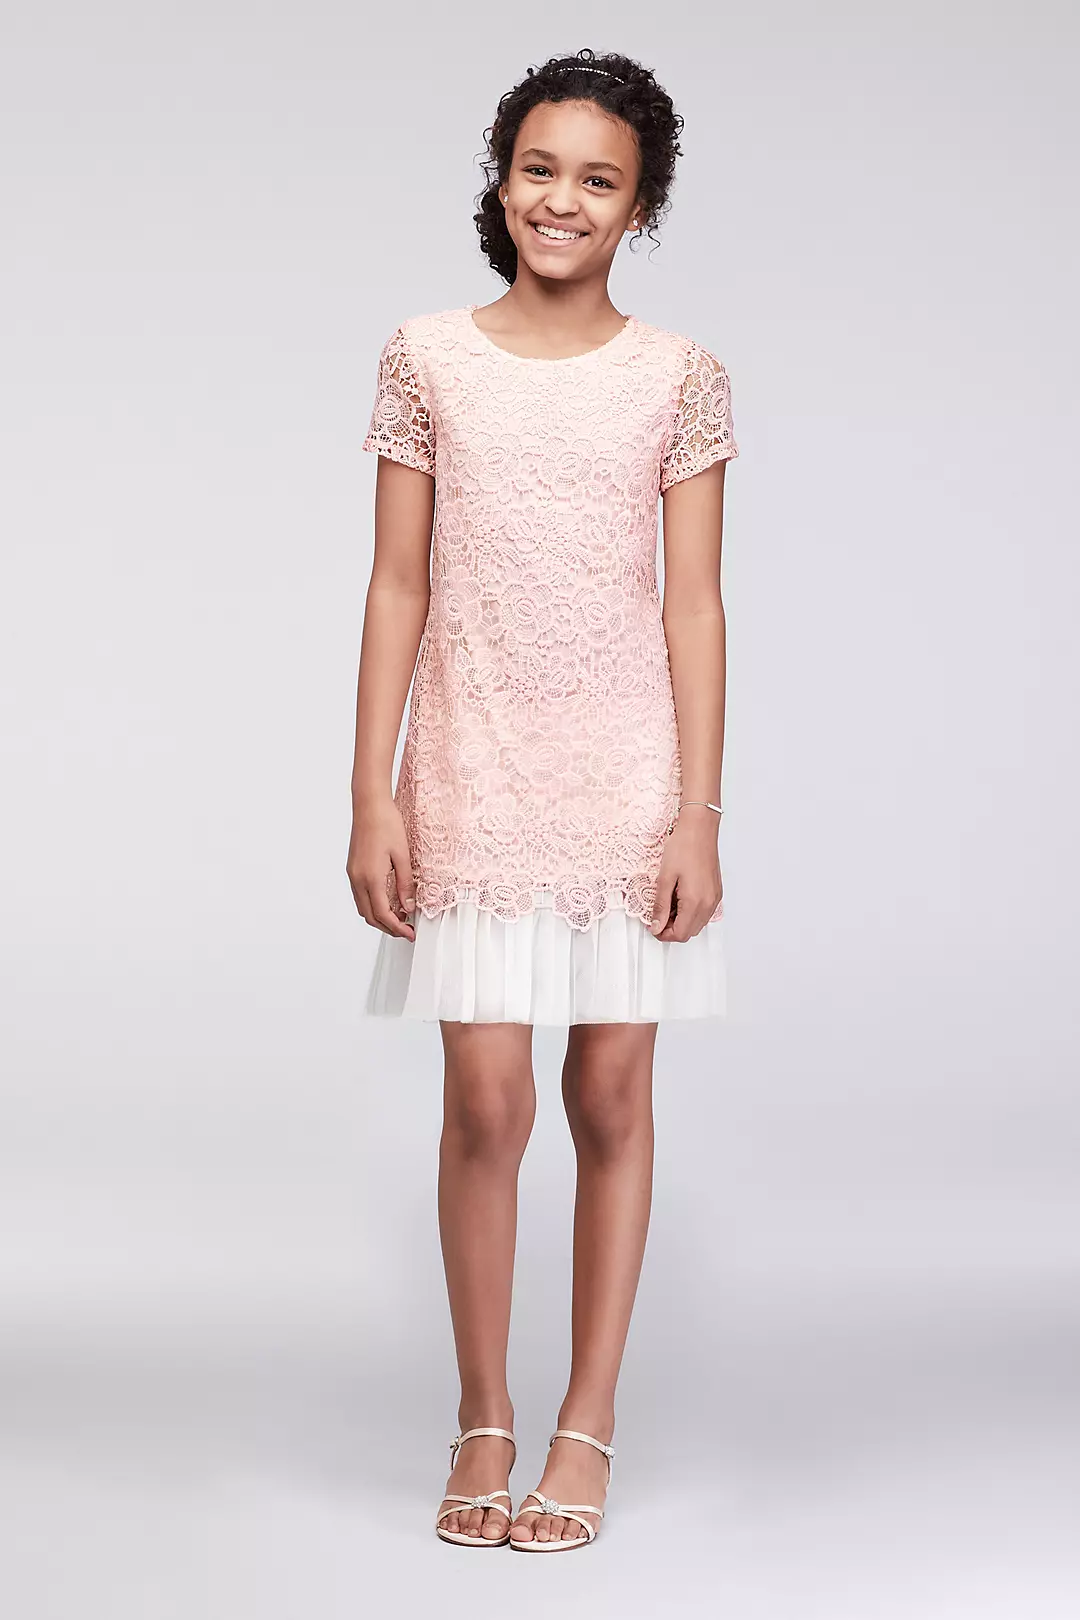 Cap Sleeve Lace Party Dress with Pleated Tulle Hem Image